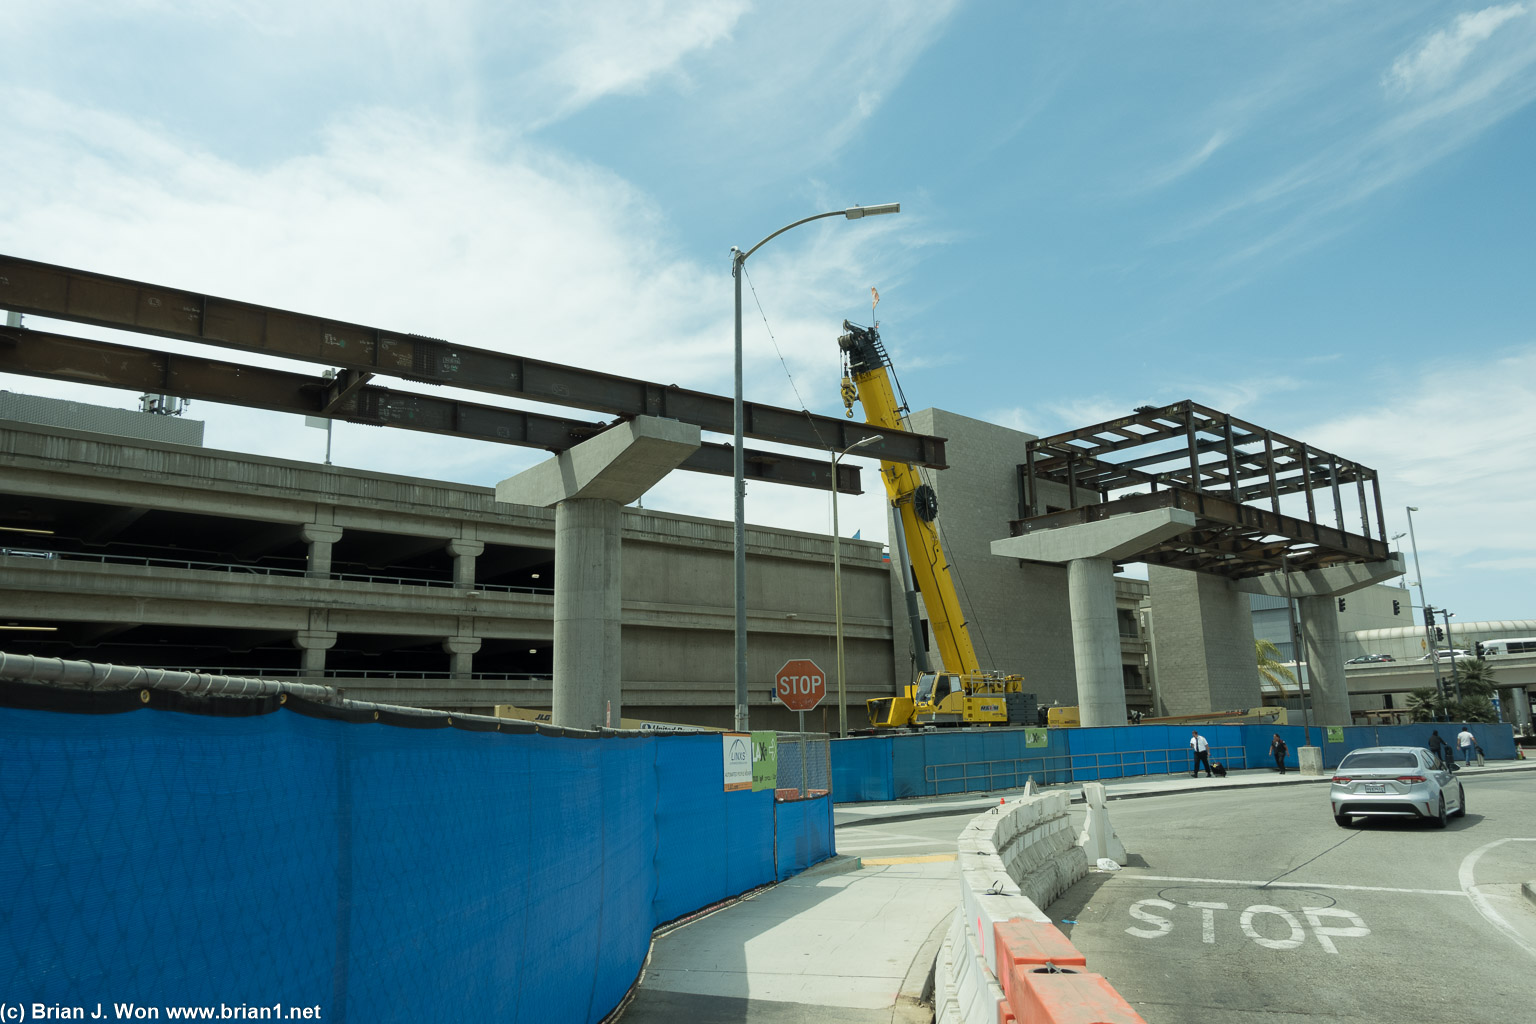 Automated people mover (APM) under construction at LAX.